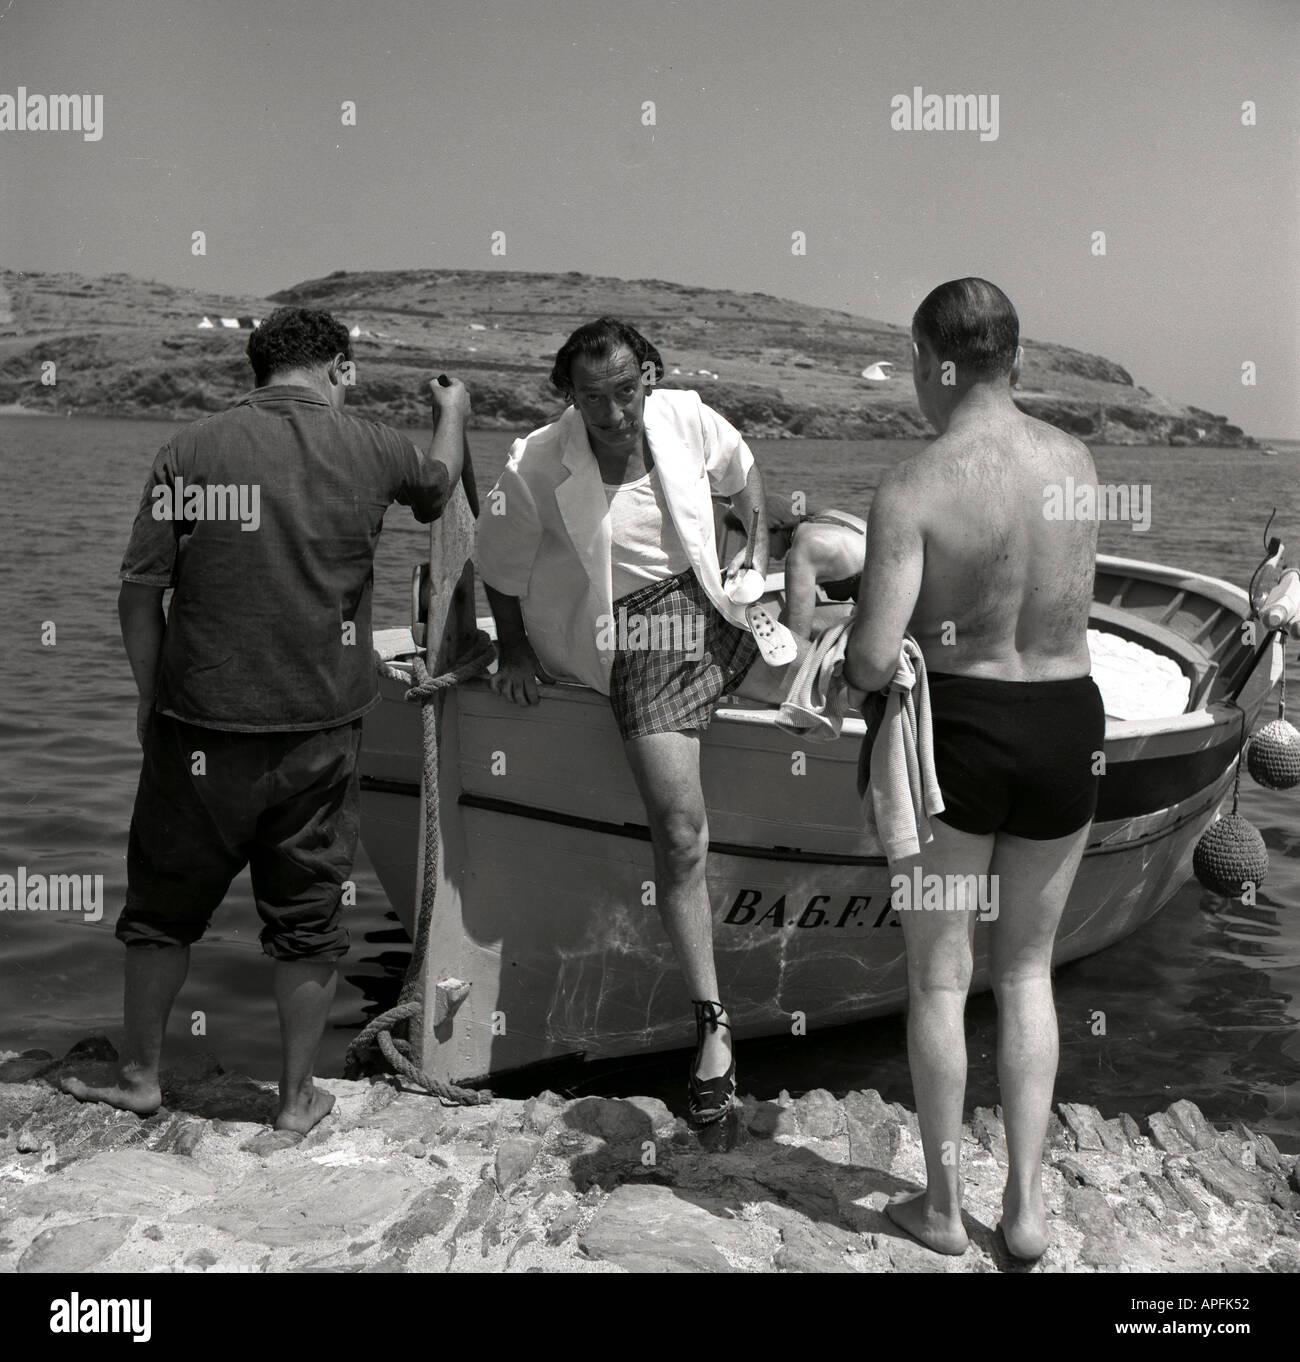 Return from a boat trip Arturo Caminada Salvador Dalí and Isidro Bea in Port Lligat 1959 Stock Photo